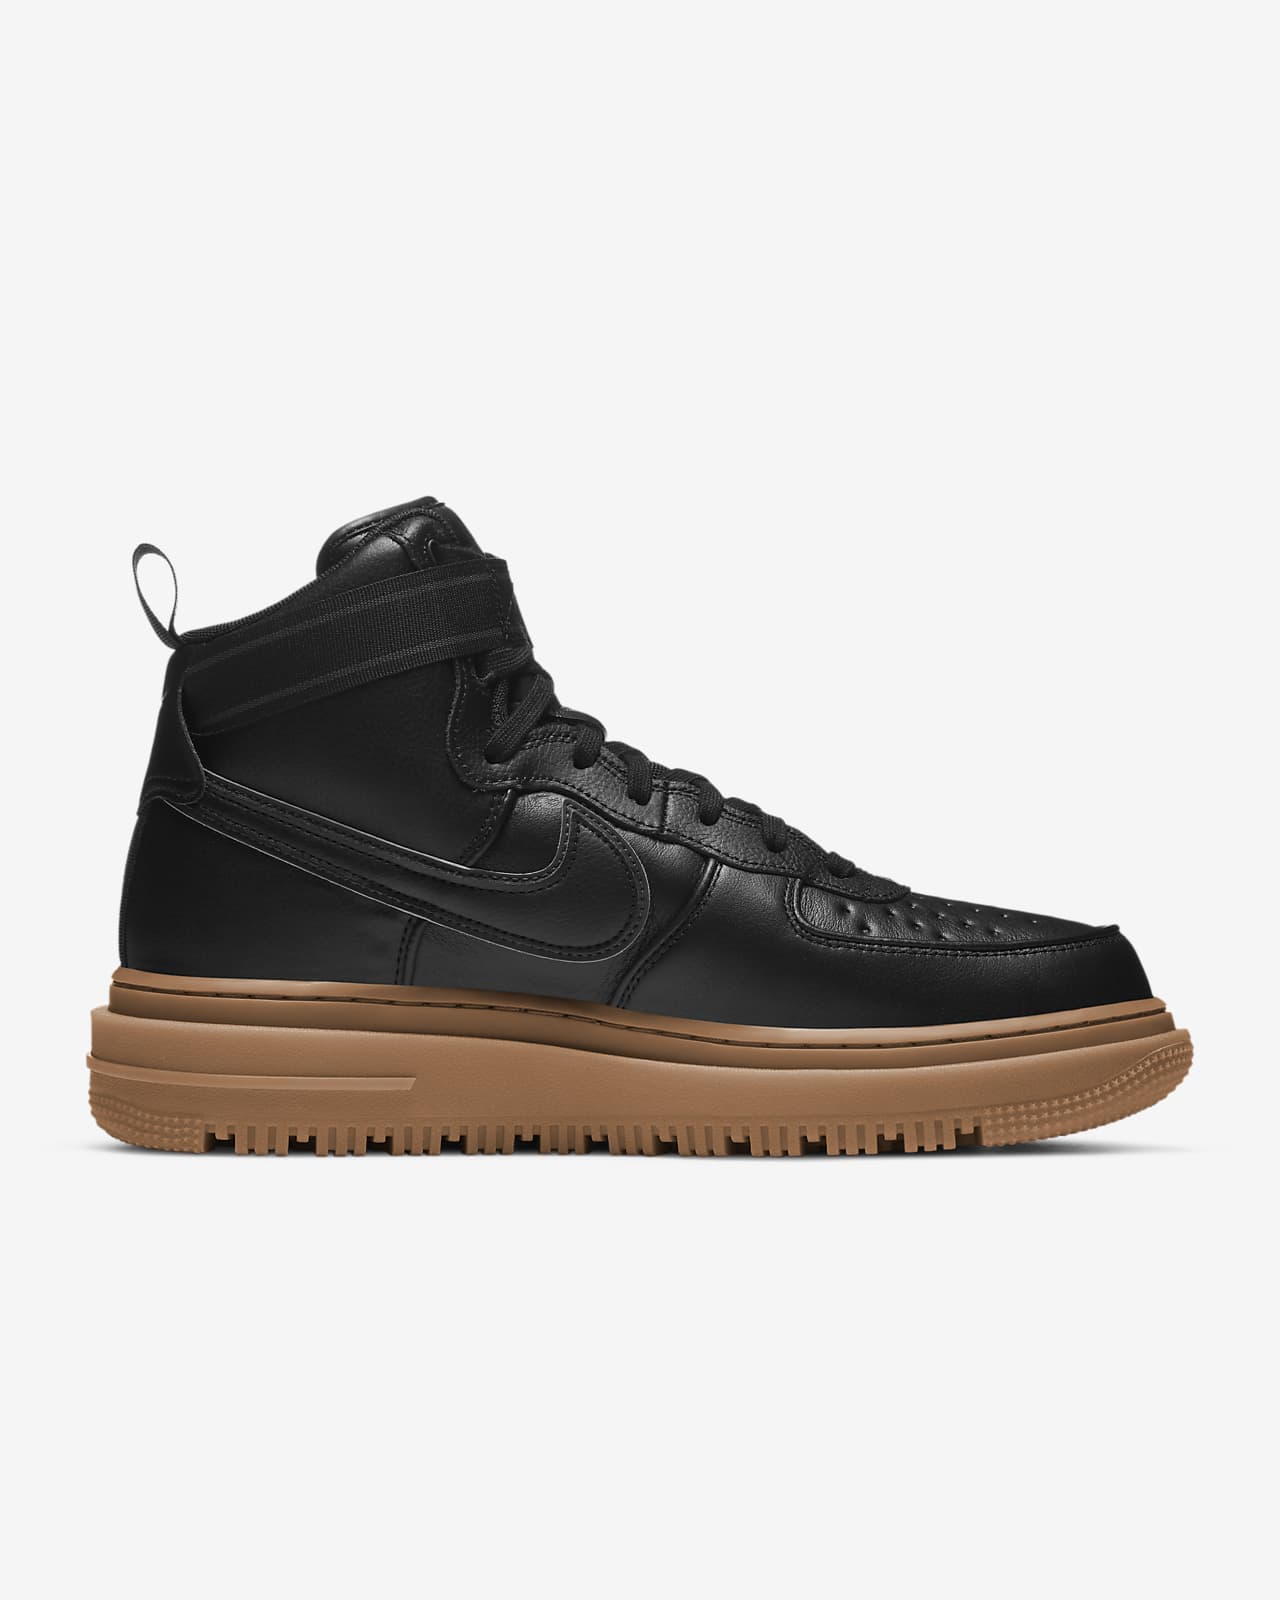 nike air force boots sneakers